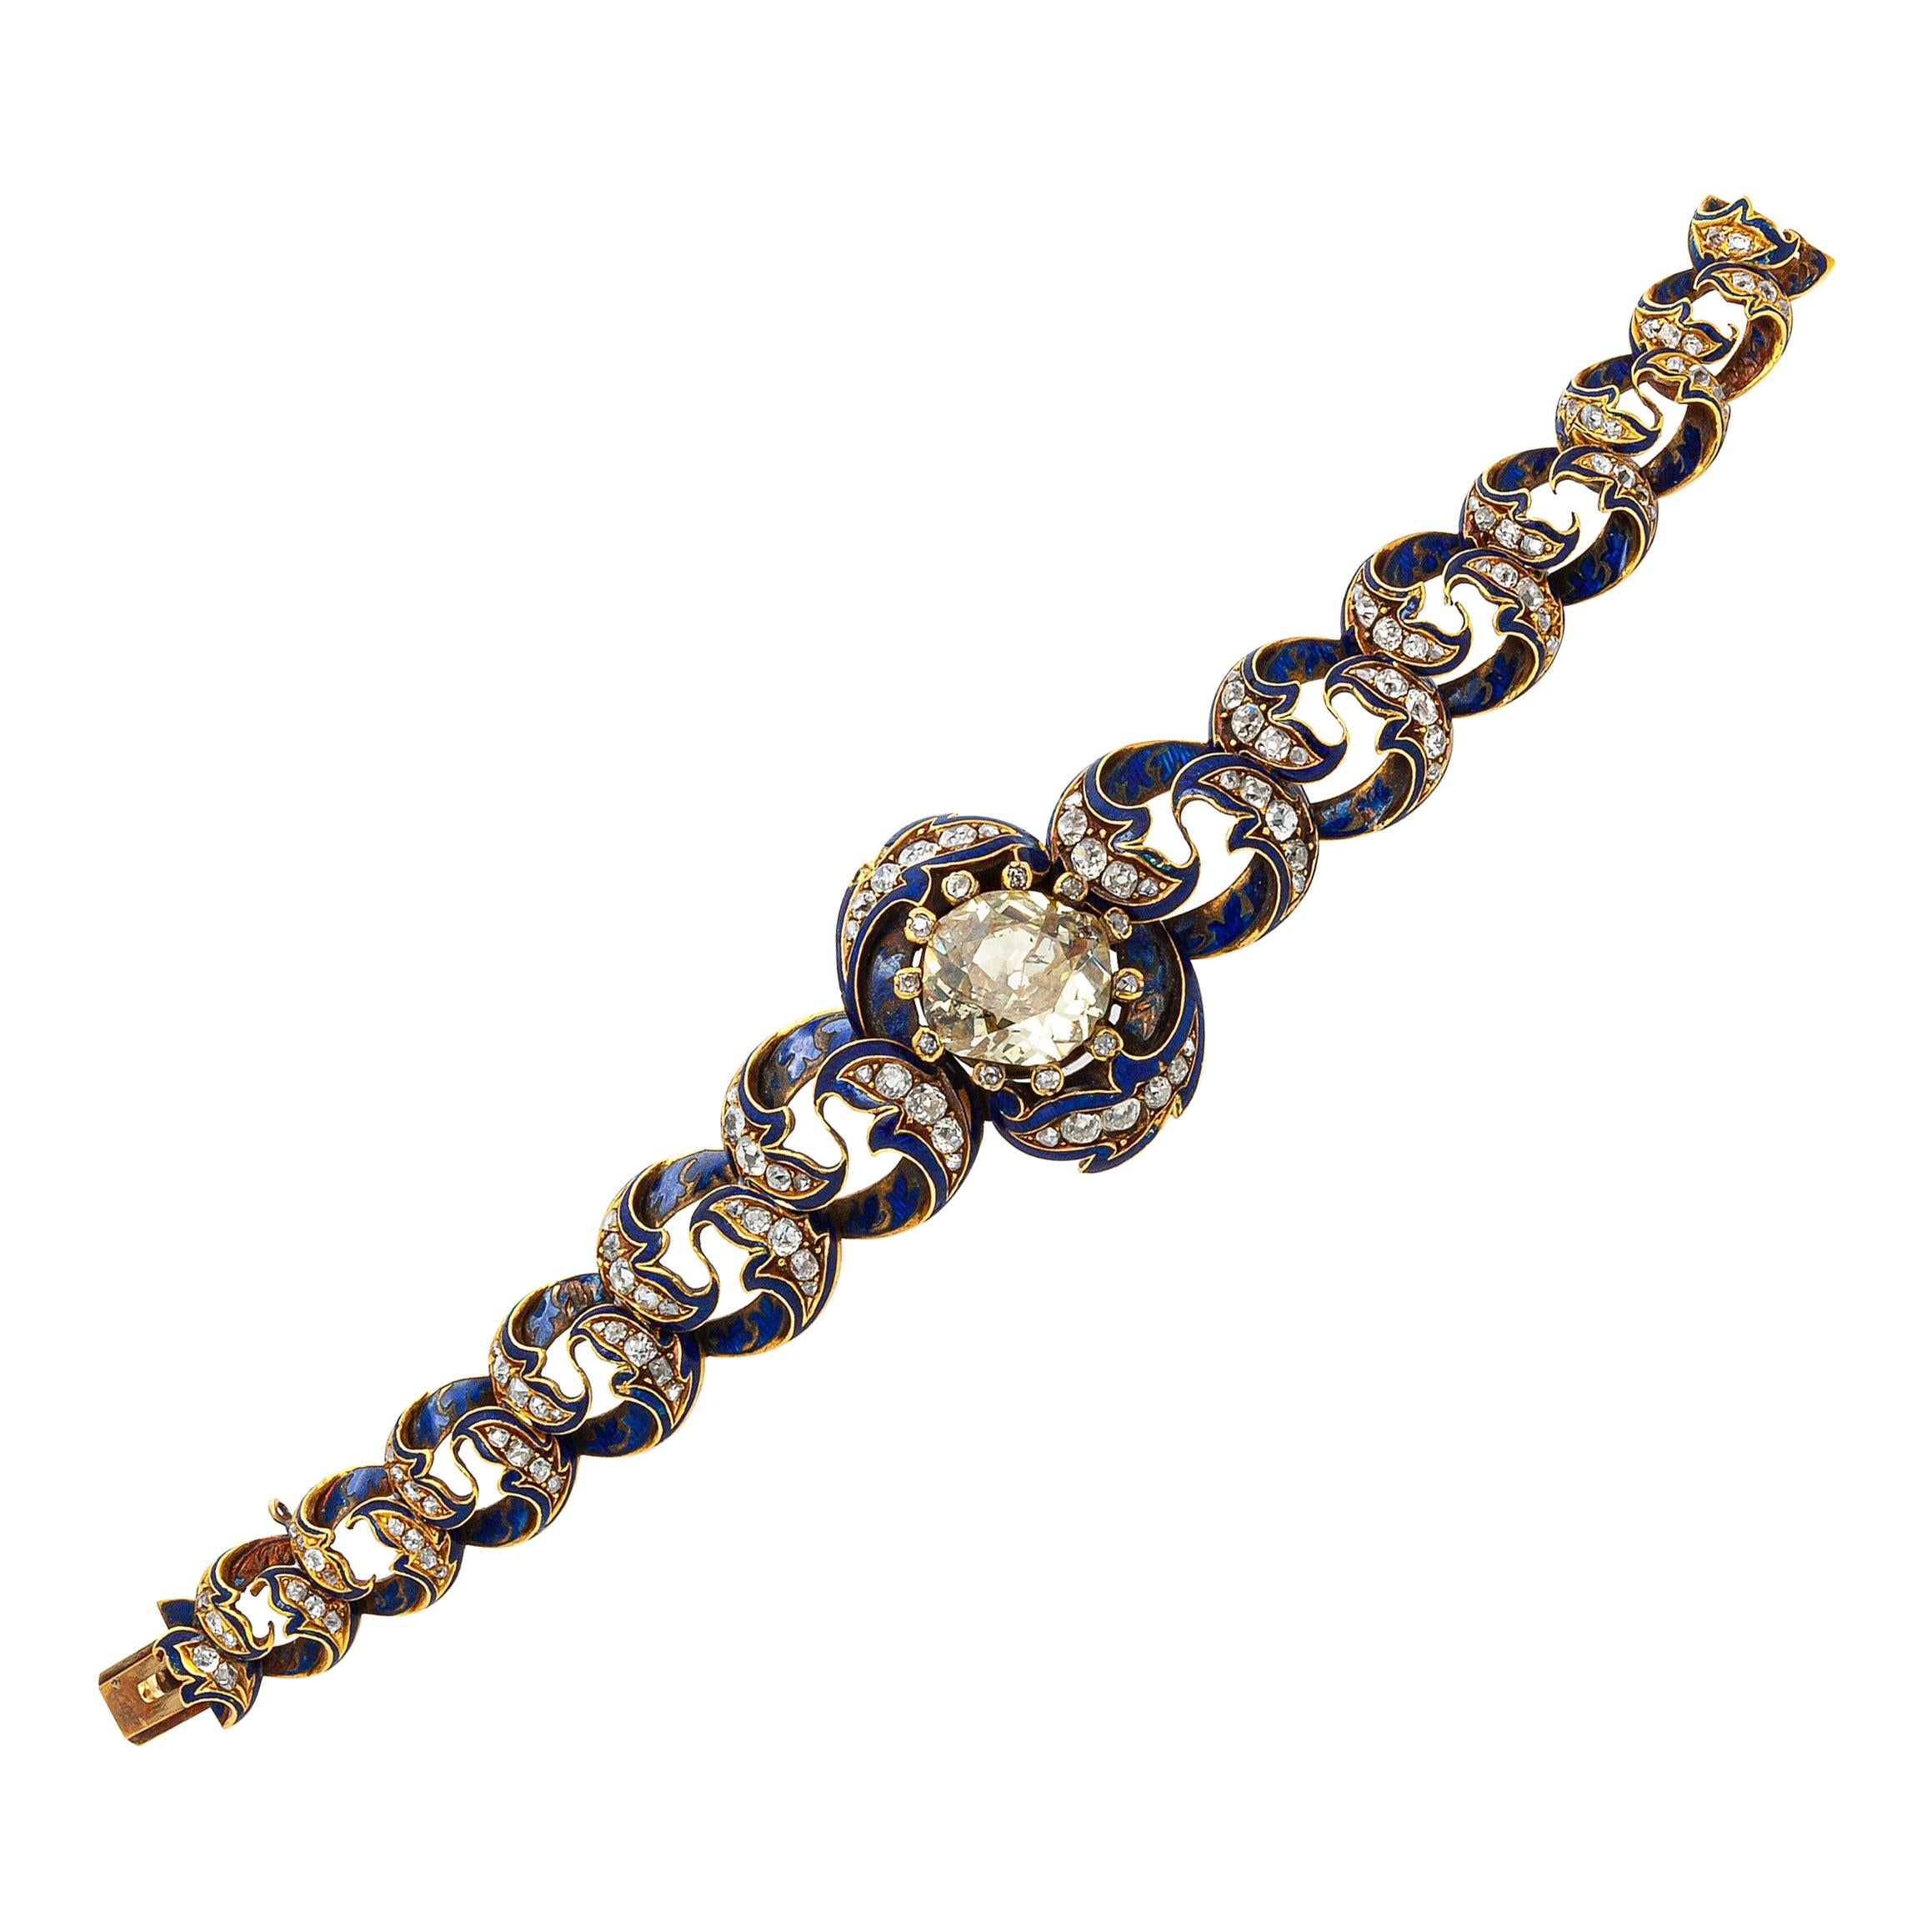 Finely crafted in 18k yellowing blue enamel with an old cut center cape diamond weighing approximately 9.50 carats. The bracelet features 130 small diamonds weighing approximately a total of 13.00 carats.
Victorian, circa 1900s